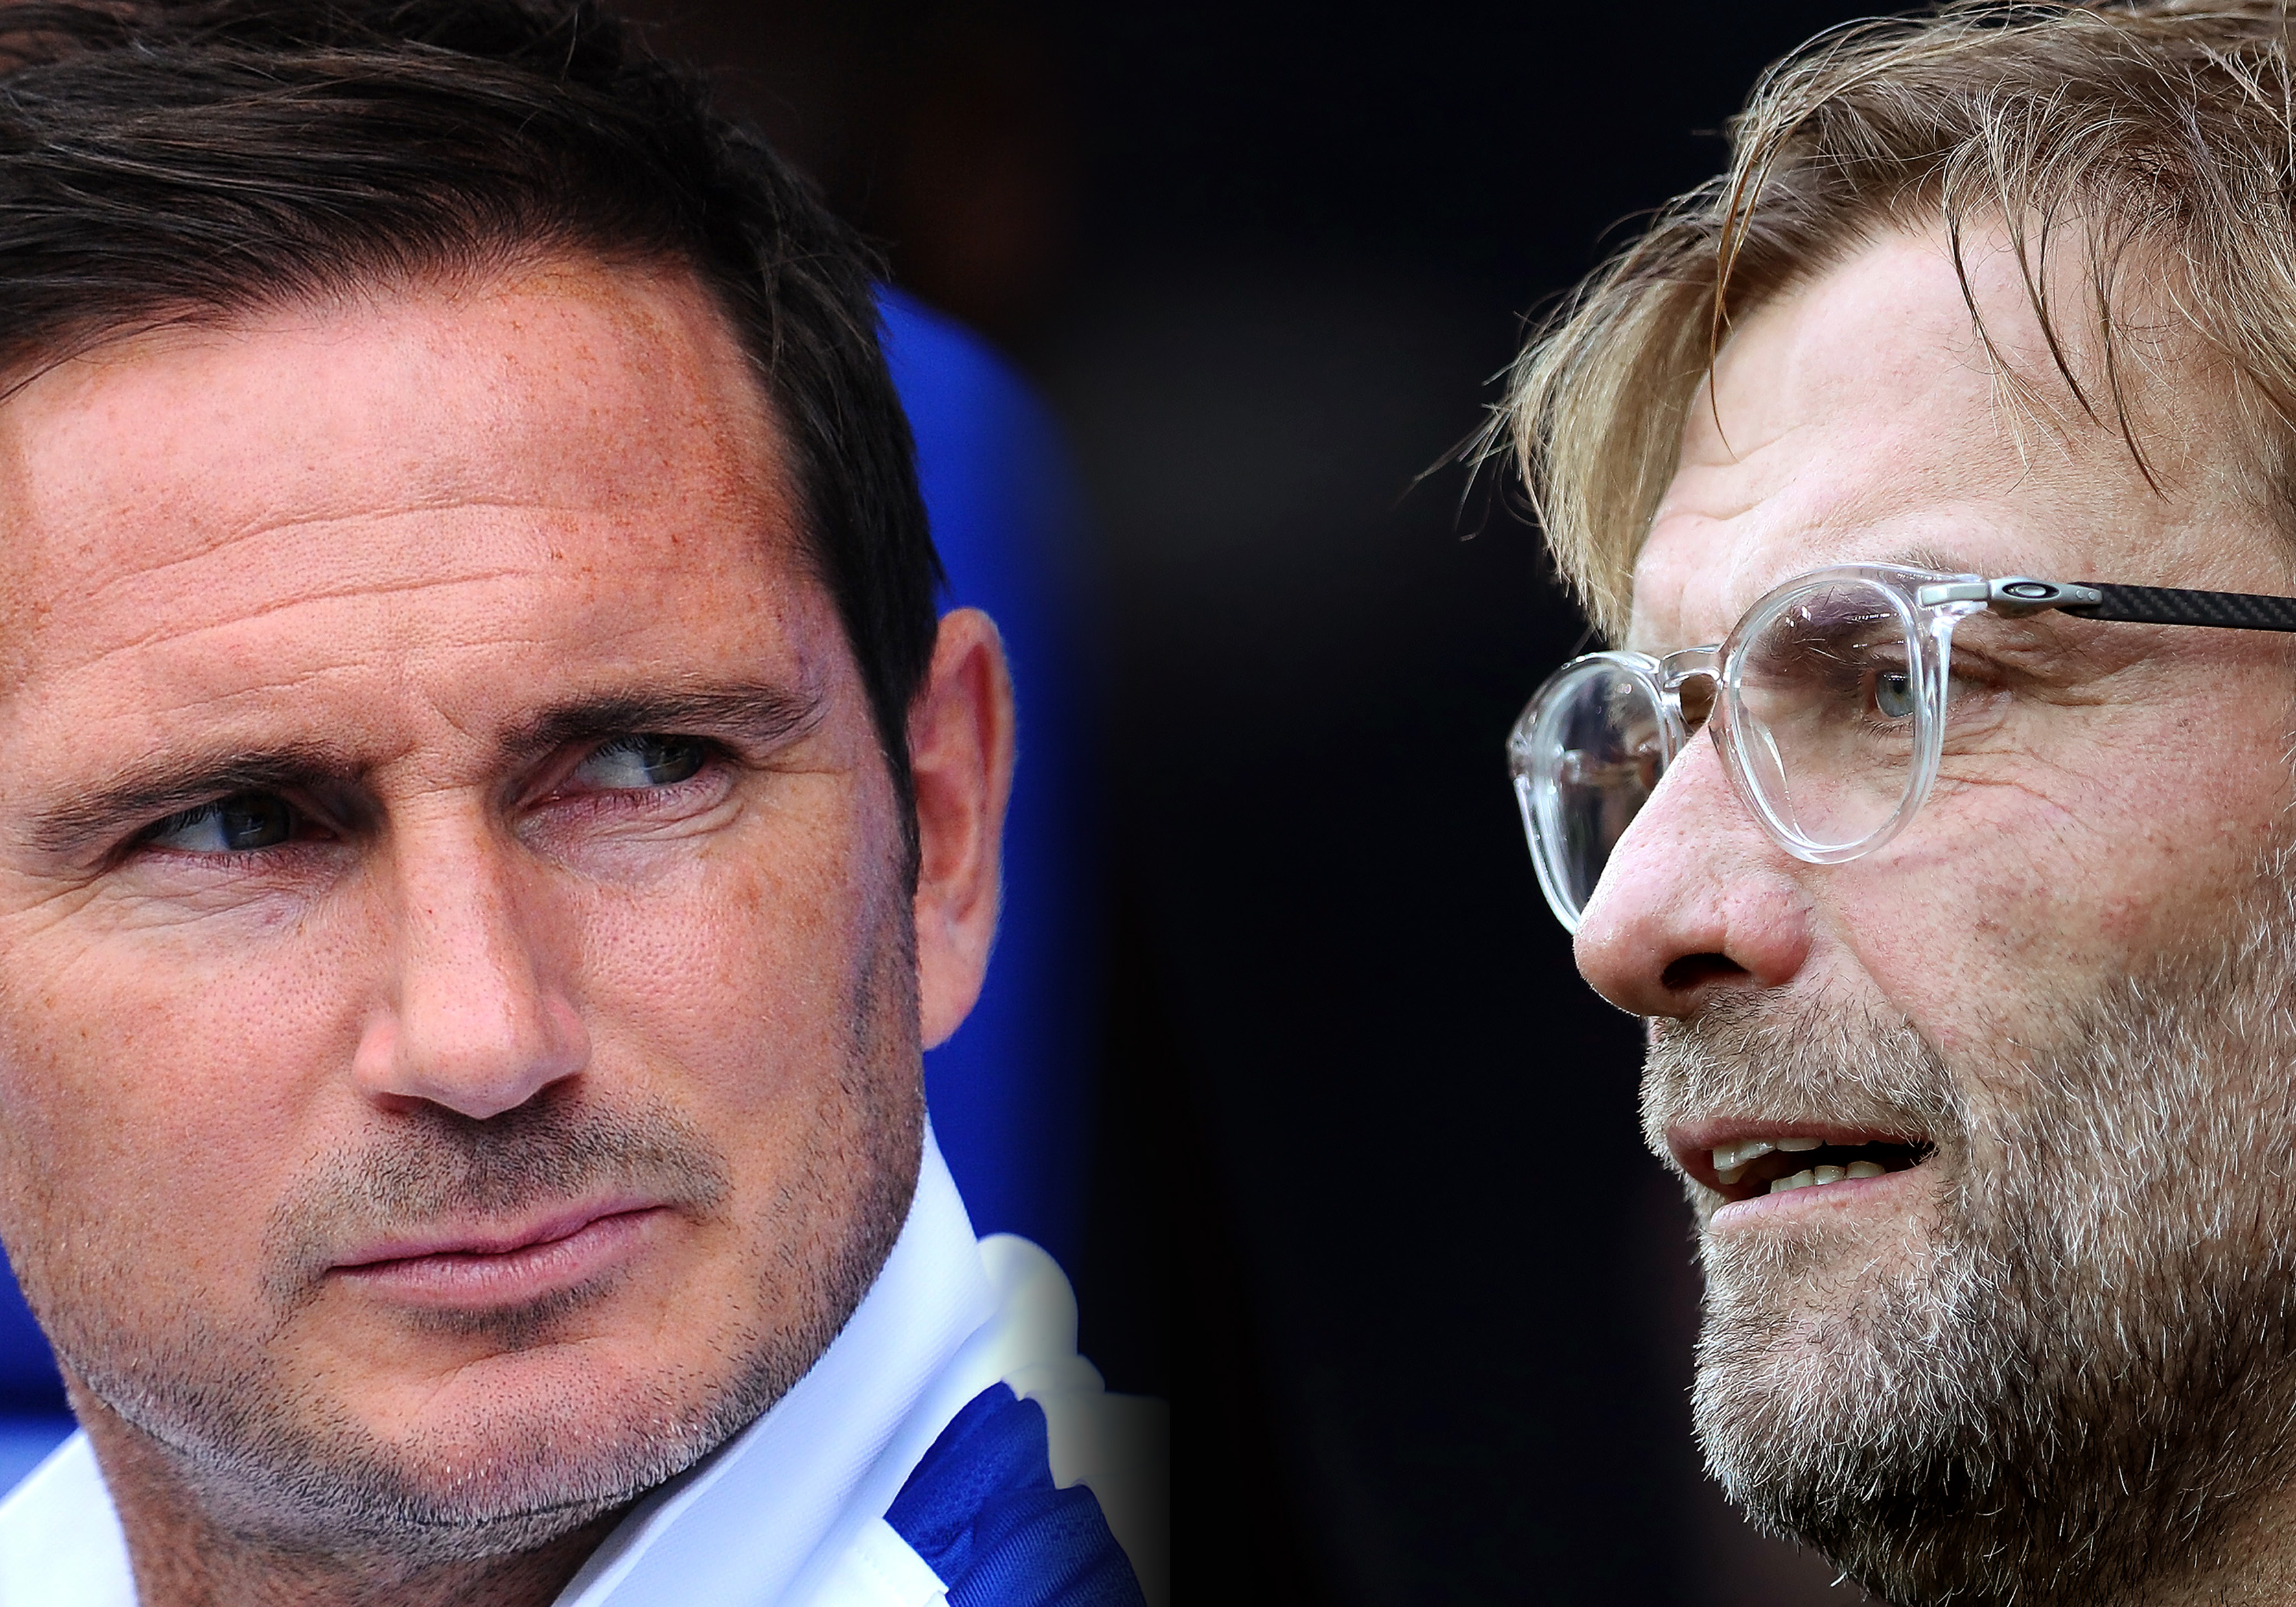 Liverpool vs Chelsea could be an exciting matchup next season. (Photo by Ian MacNicol/Getty Images)